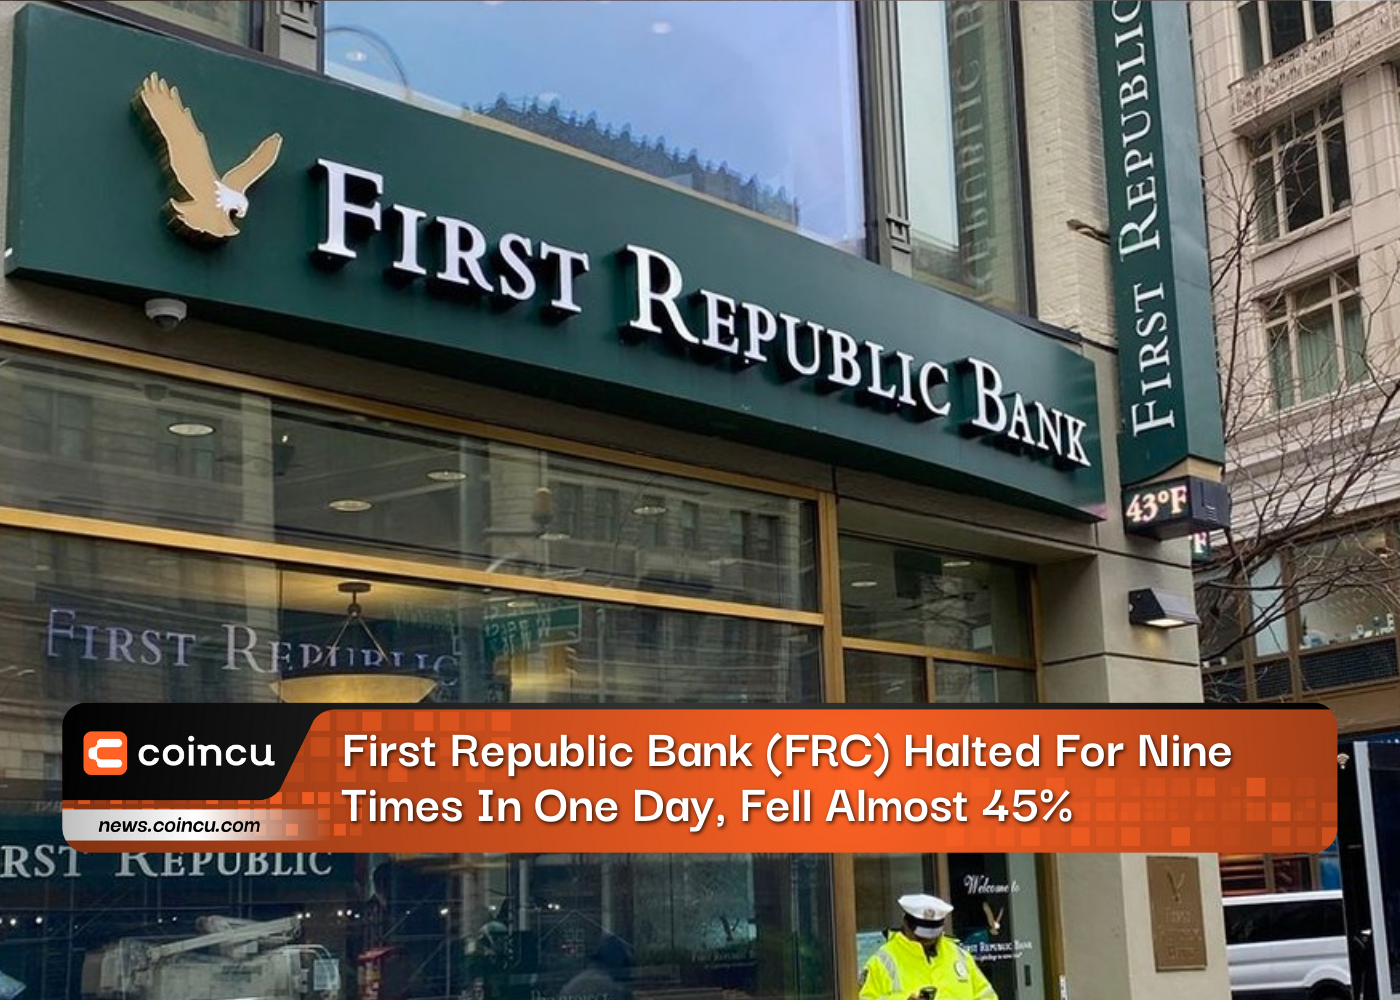 First Republic Bank (FRC) Halted For Nine Times In One Day, Fell Almost 45%